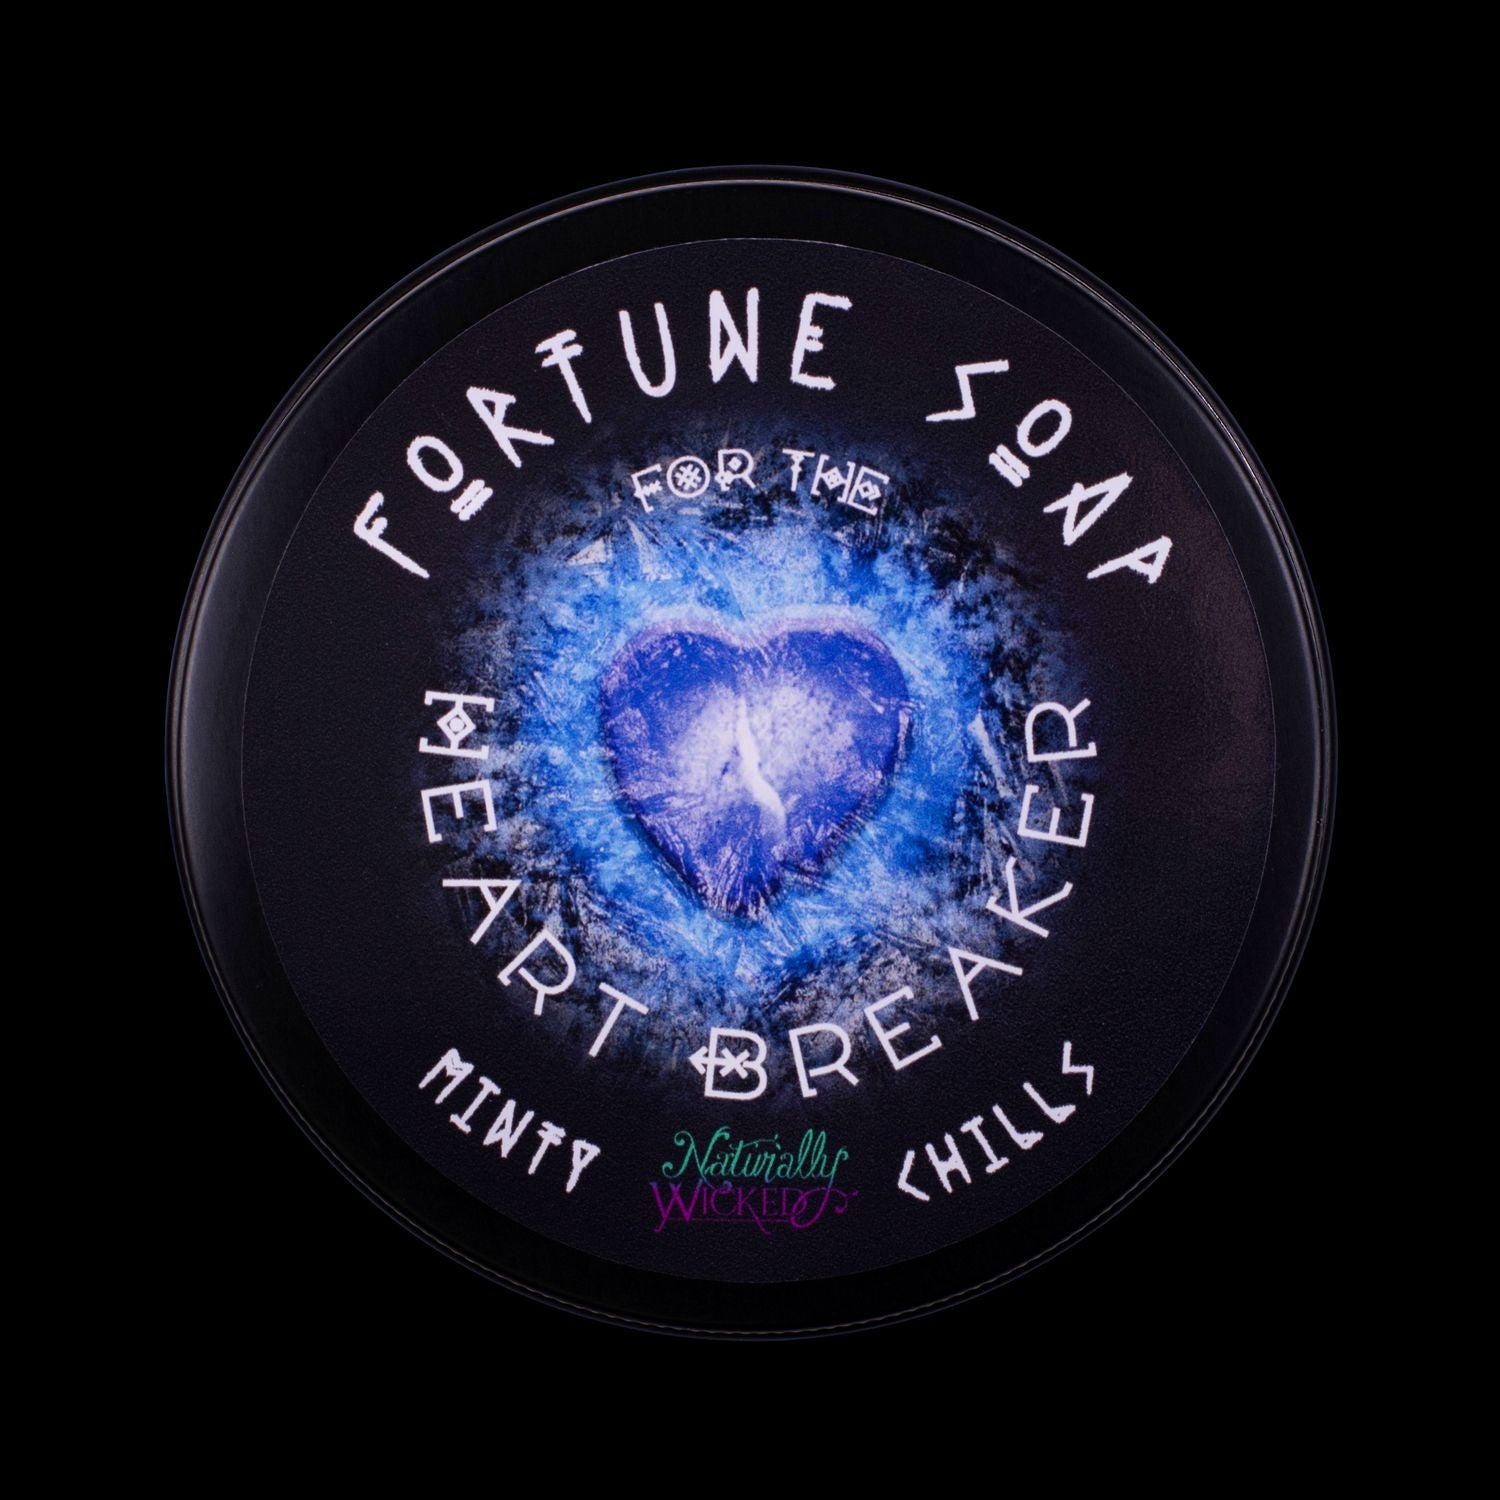 Naturally Wicked Fortune Soap For The Heart Breaker. Icy Blue Plant-based Soap With Quartz Rune Crystal, Scented With Minty Chills All Situated In A Black Glossy Gift Tin.